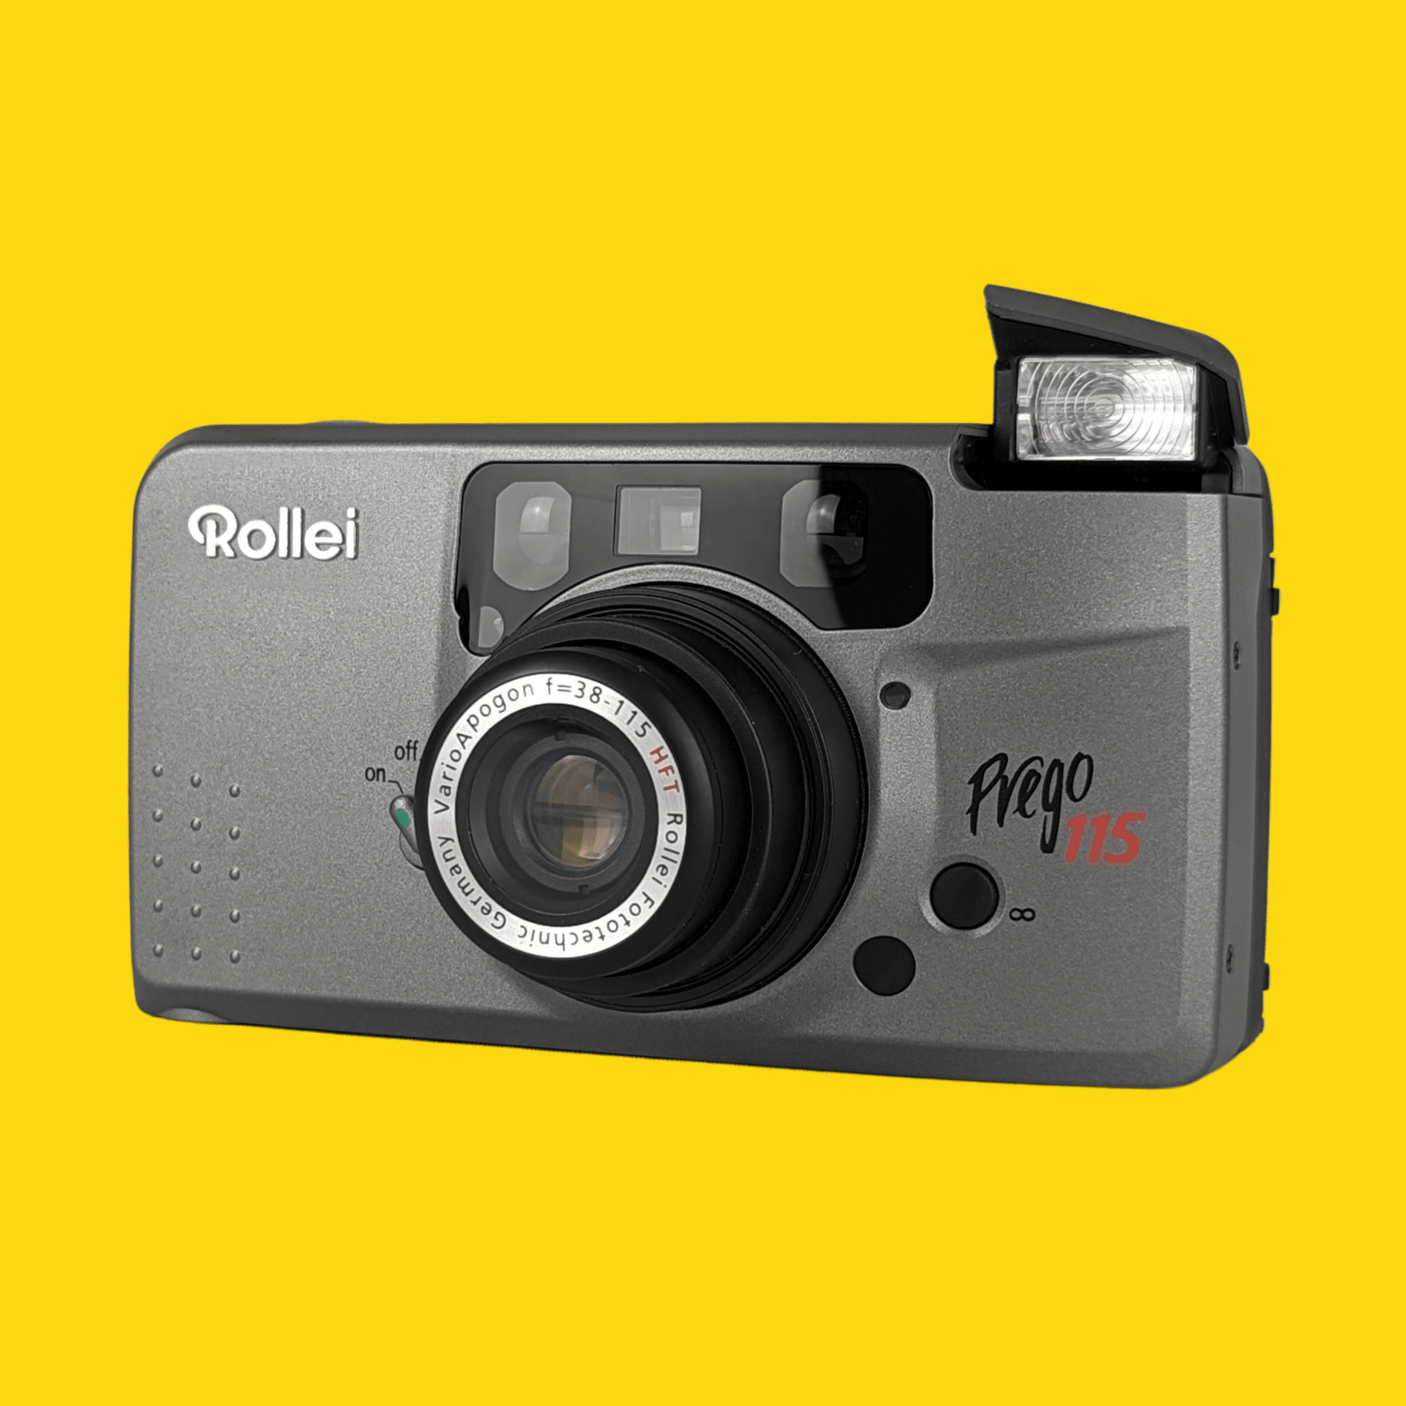 BRAND NEW - Rollei Prego 115 35mm Film Camera Point and Shoot